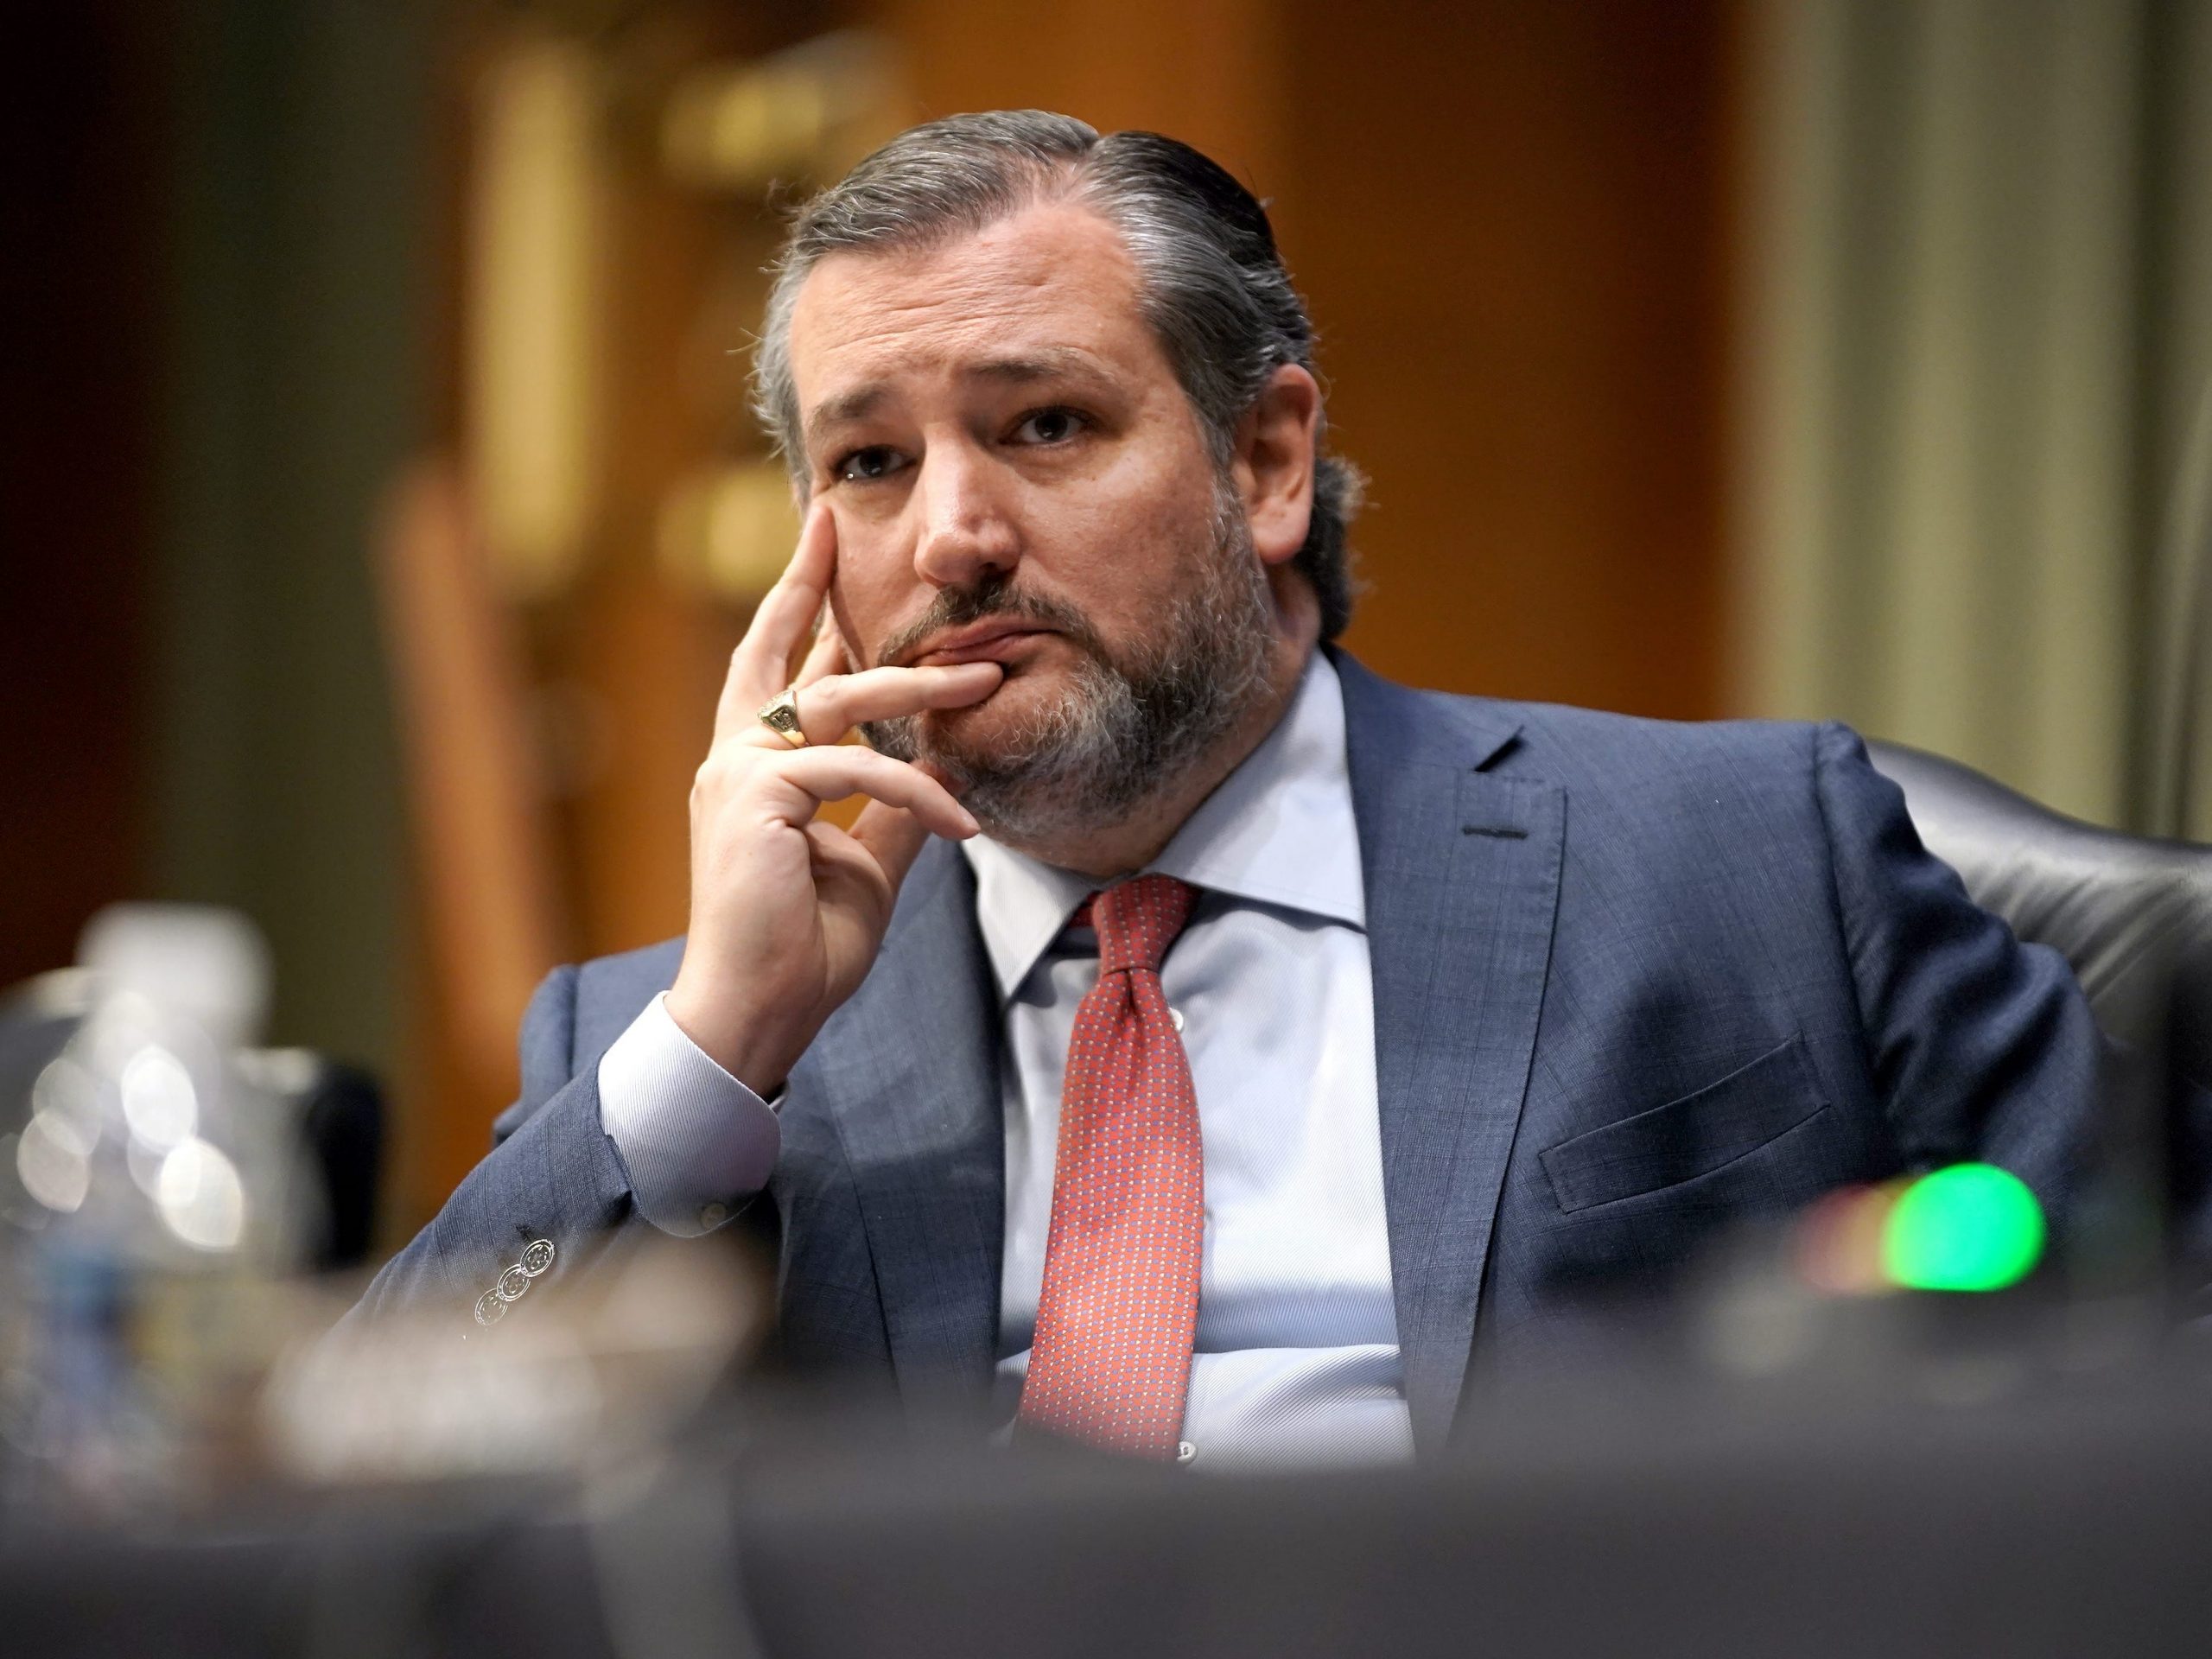 Sen. Ted Cruz (R-TX) listens at the confirmation hearing for Samantha Power, nominee to be Administrator of the U.S. Agency for International Development, before the Senate Foreign Relations Committee on March 23, 2021 on Capitol Hill in Washington, DC.